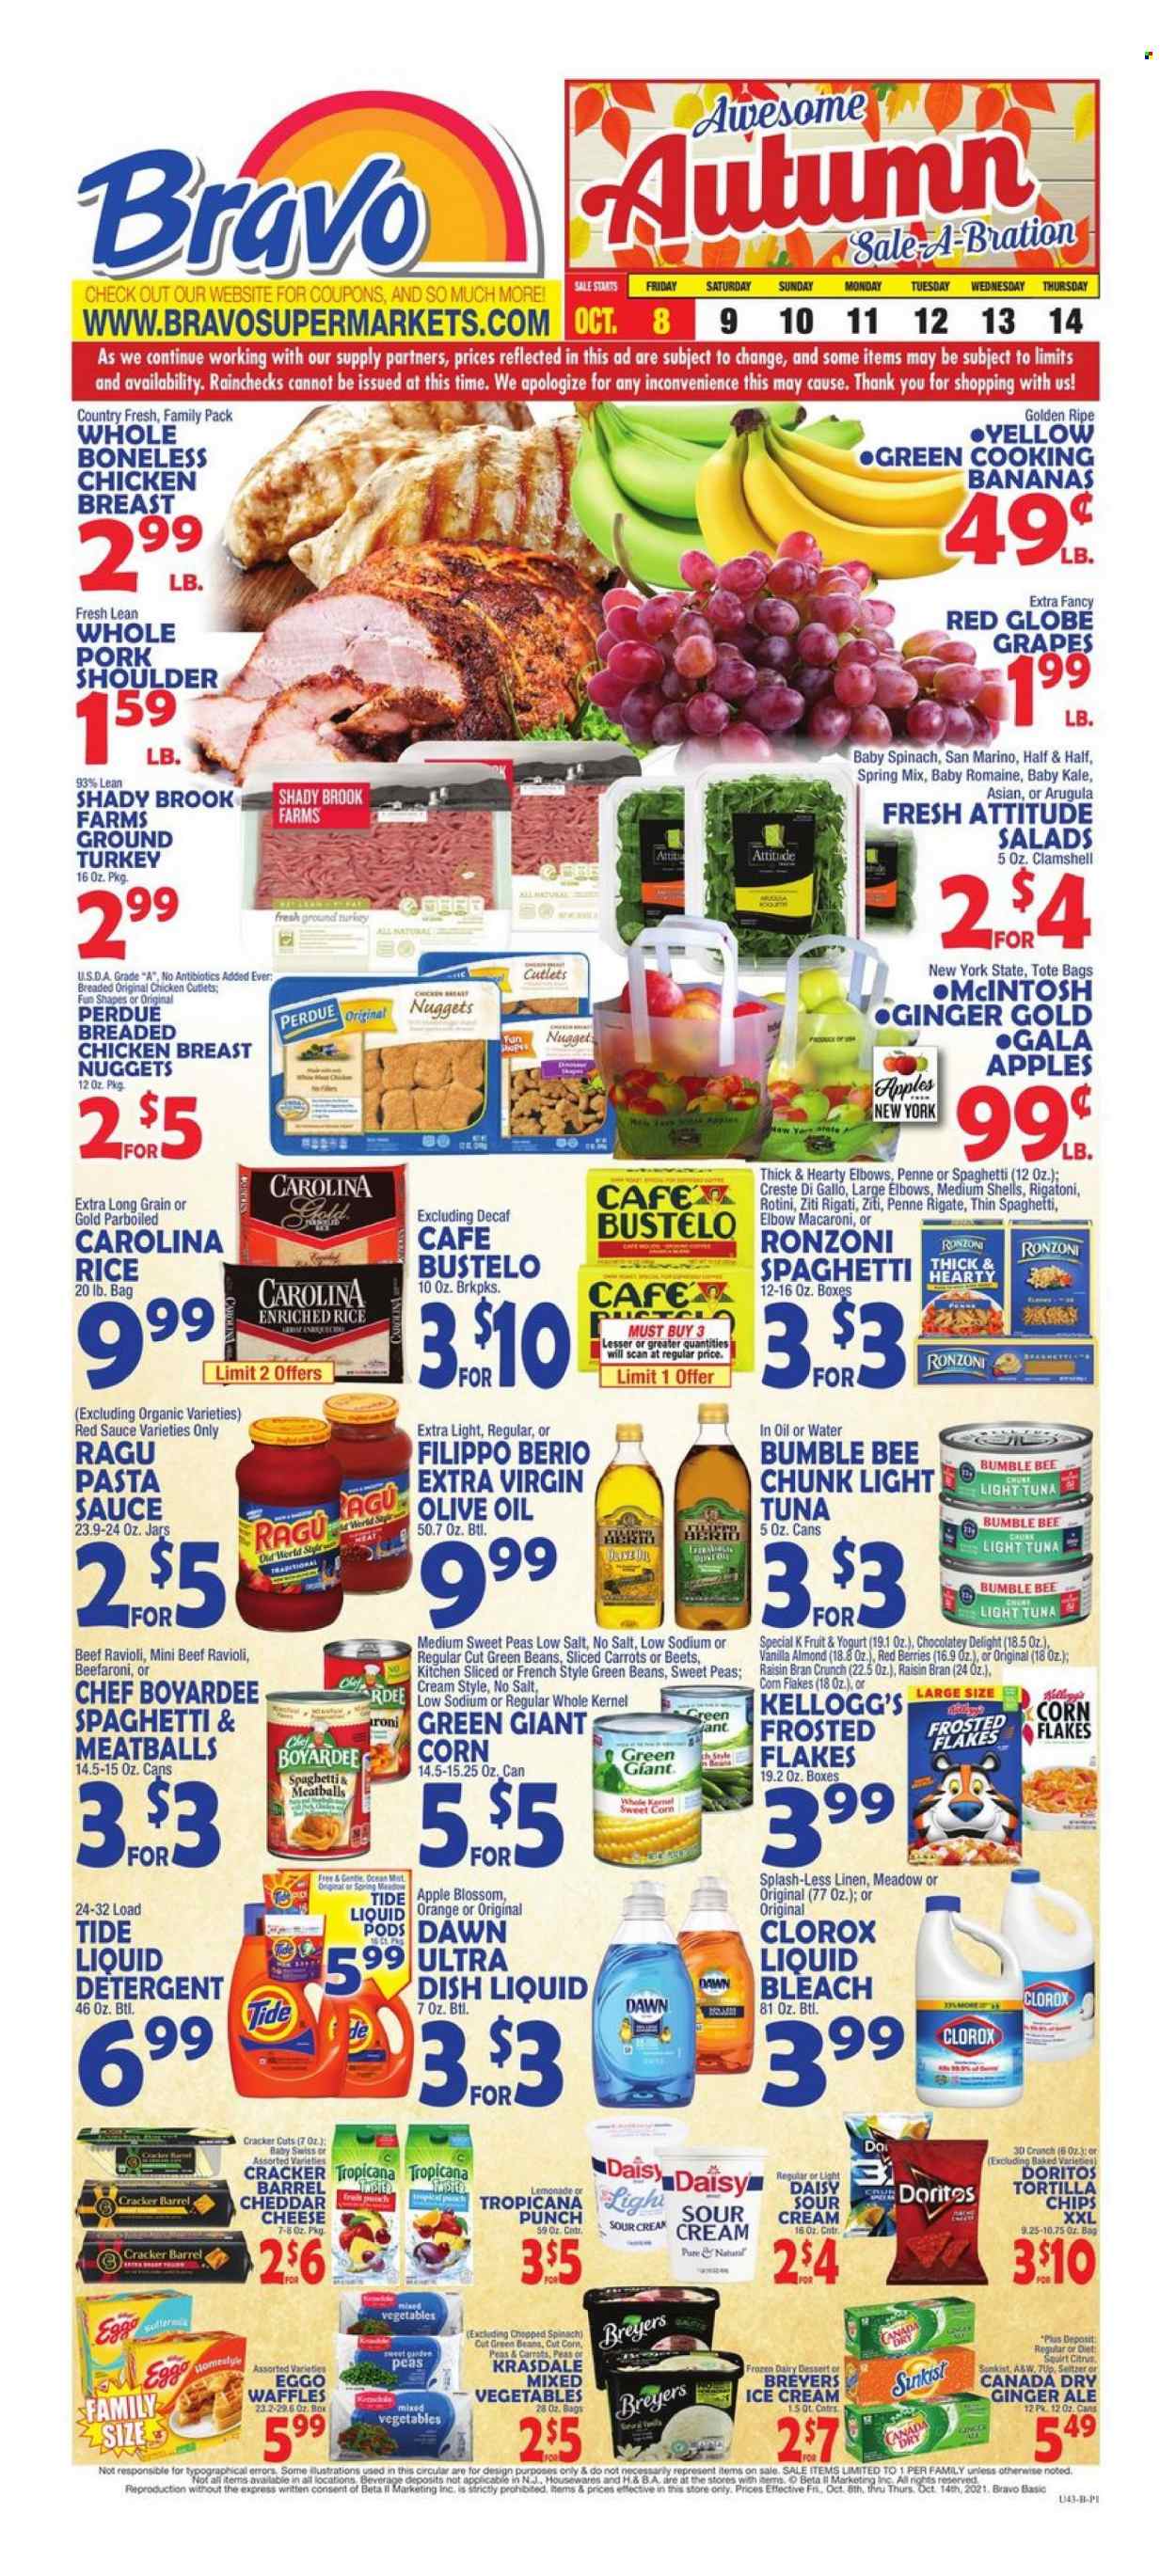 thumbnail - Bravo Supermarkets Flyer - 10/08/2021 - 10/14/2021 - Sales products - waffles, green beans, spinach, kale, sweet corn, apples, grapes, Red Globe, oranges, tuna, ravioli, pasta sauce, meatballs, macaroni, nuggets, Bumble Bee, sauce, chicken nuggets, Perdue®, ragú pasta, yoghurt, Blossom, sour cream, ice cream, mixed vegetables, crackers, Kellogg's, Doritos, tortilla chips, chips, light tuna, Chef Boyardee, corn flakes, Frosted Flakes, Raisin Bran, rice, parboiled rice, penne, ragu, extra virgin olive oil, Canada Dry, ginger ale, lemonade, 7UP, A&W, seltzer water, punch, ground turkey, chicken cutlets, pork meat, pork shoulder, detergent, bleach, Clorox, Tide, liquid detergent, dishwashing liquid, Half and half. Page 1.